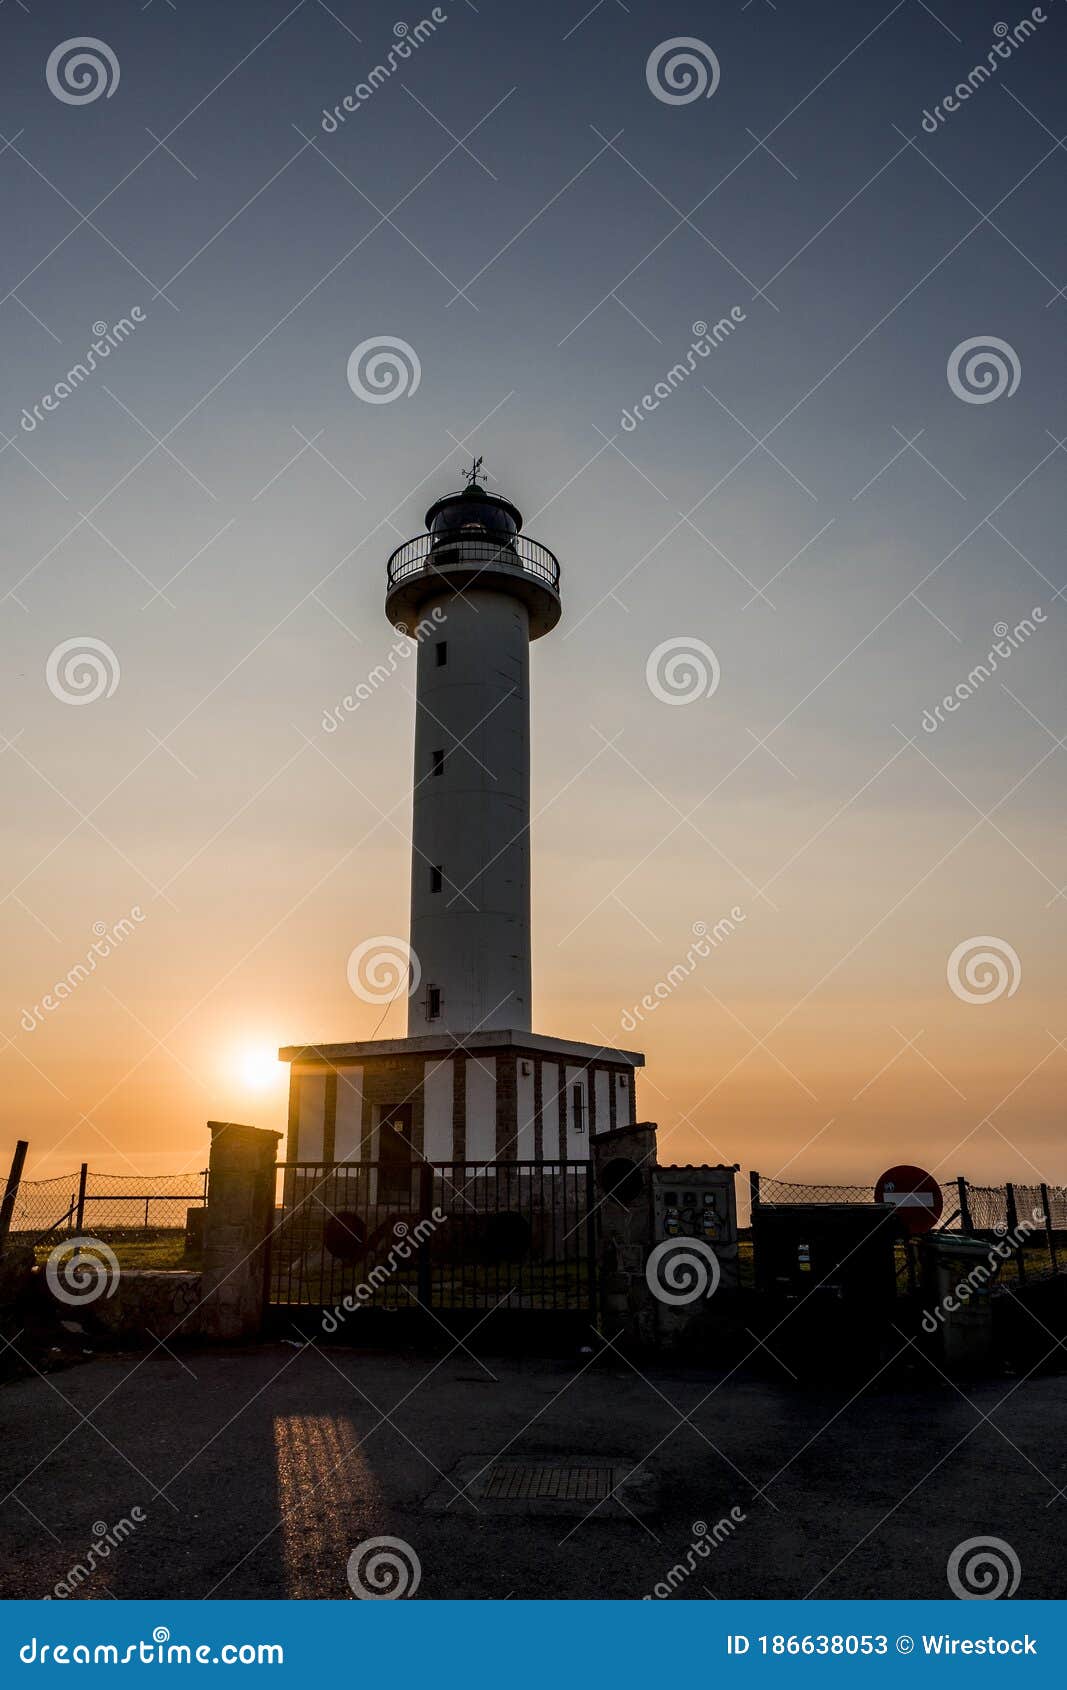 lighthouse of lastres at sunset captured in the town of luces, spain